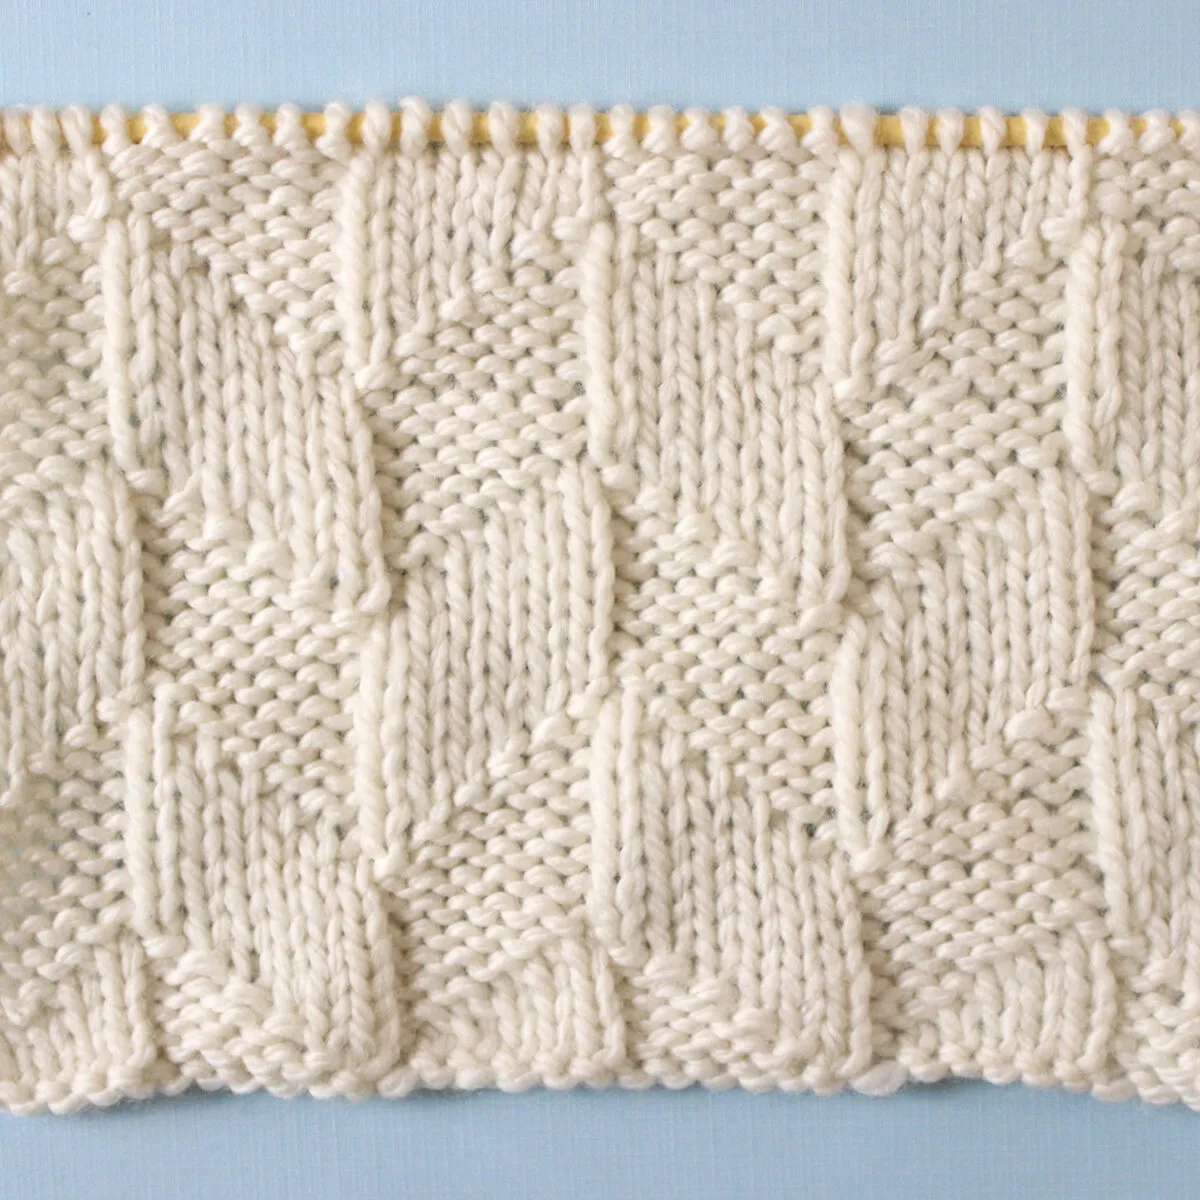 Knit Stitch Dictionary - Around the Table Yarns